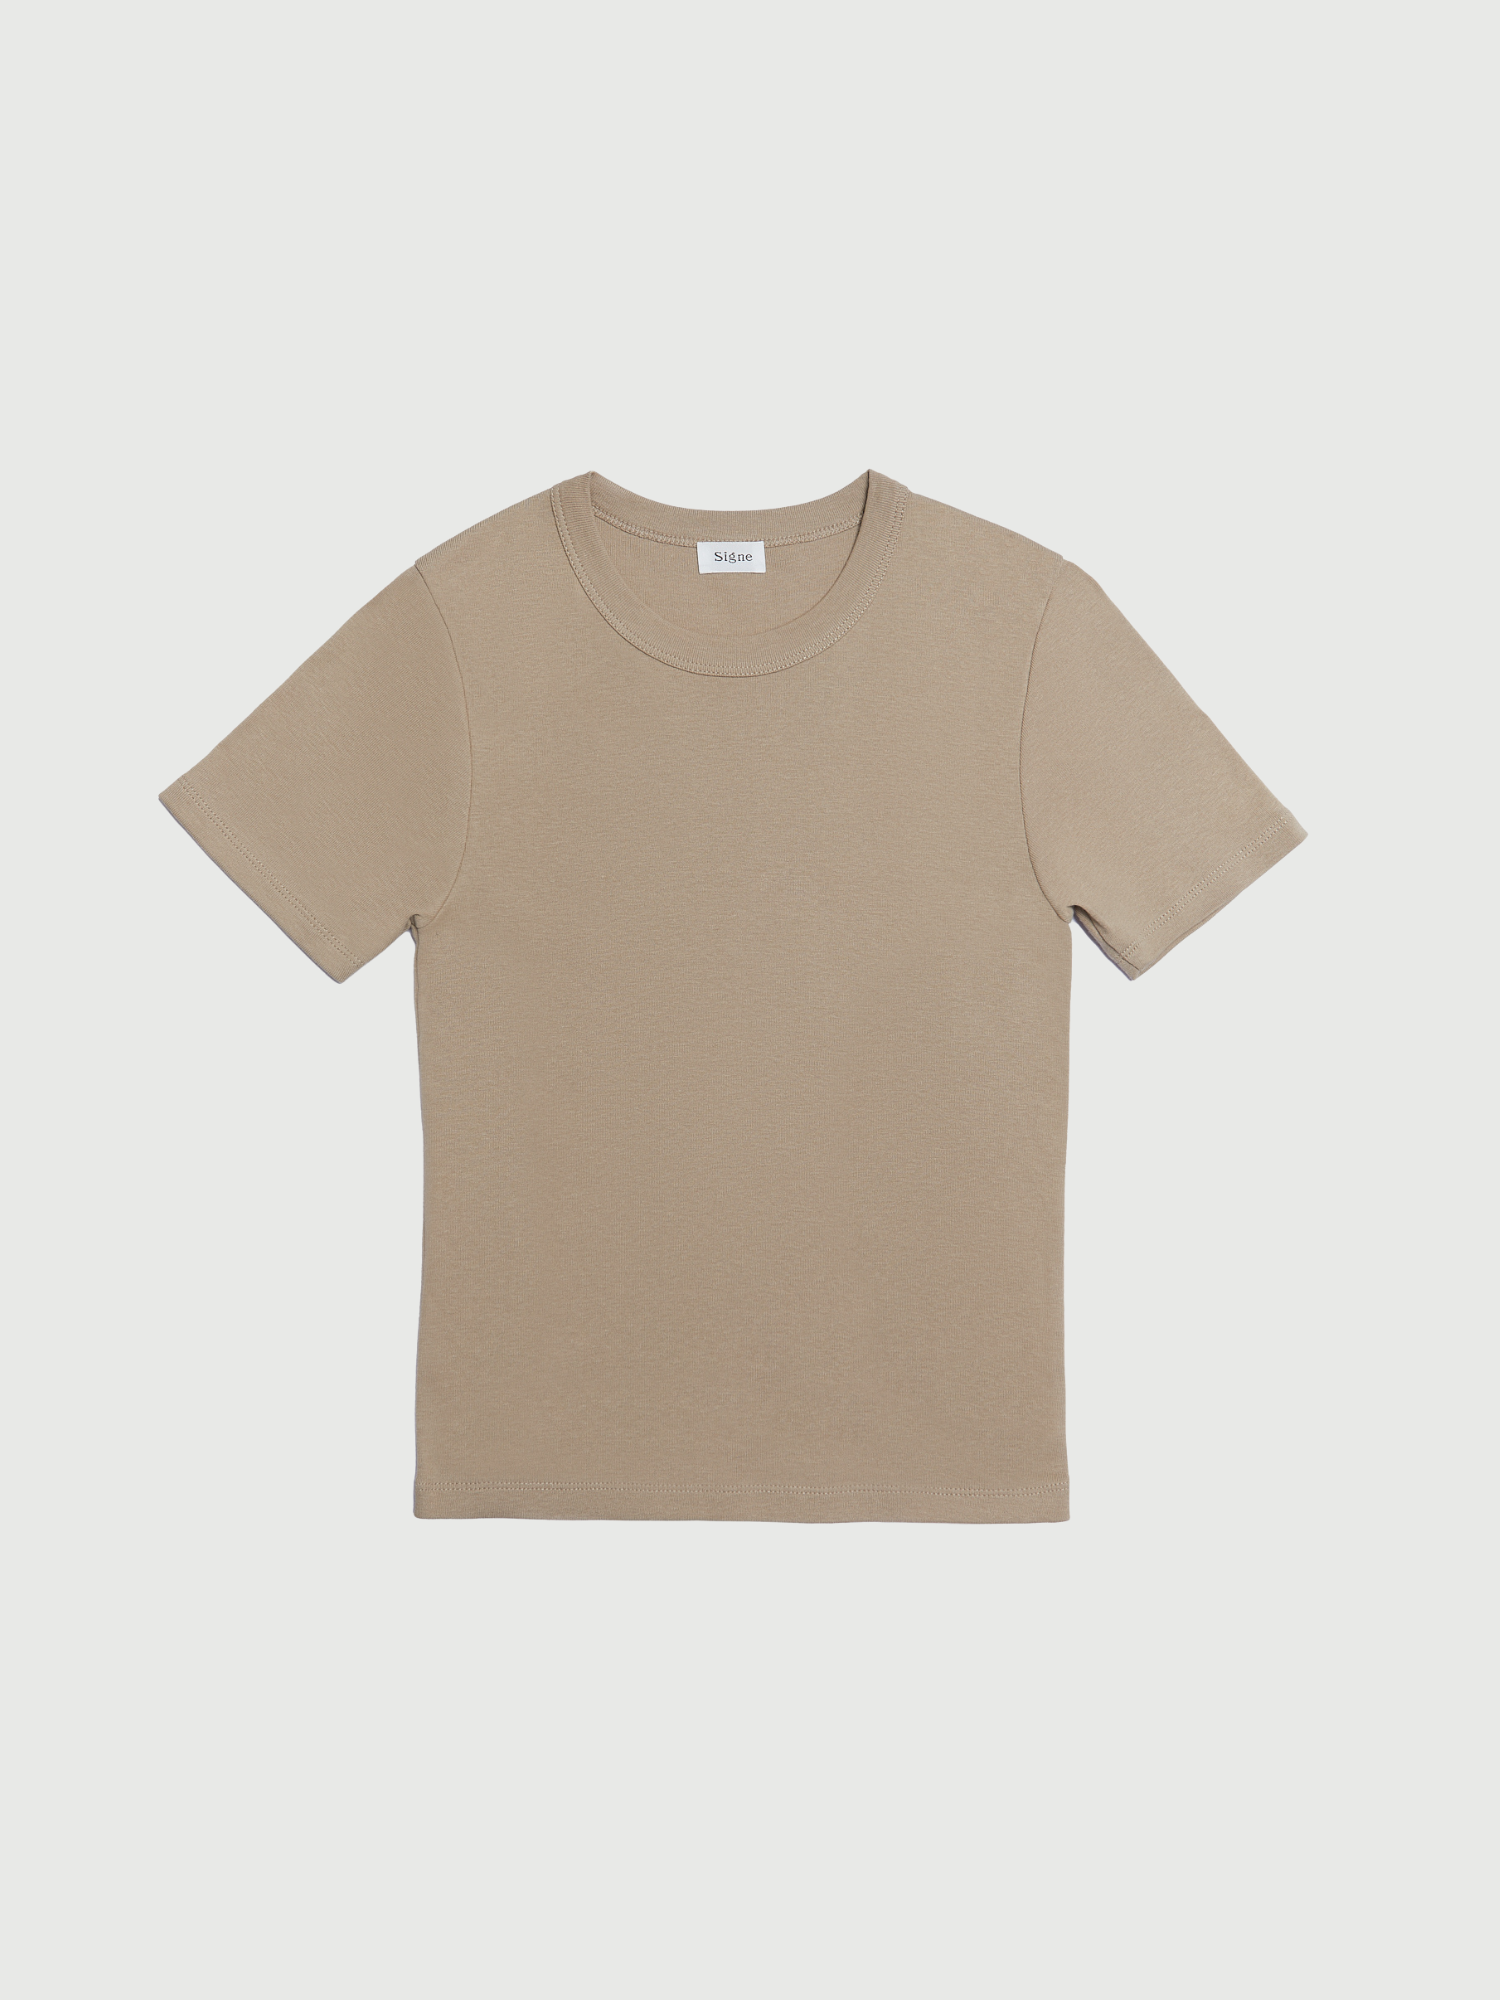 Hazel Organic Cotton Fitted T-shirt | By Signe